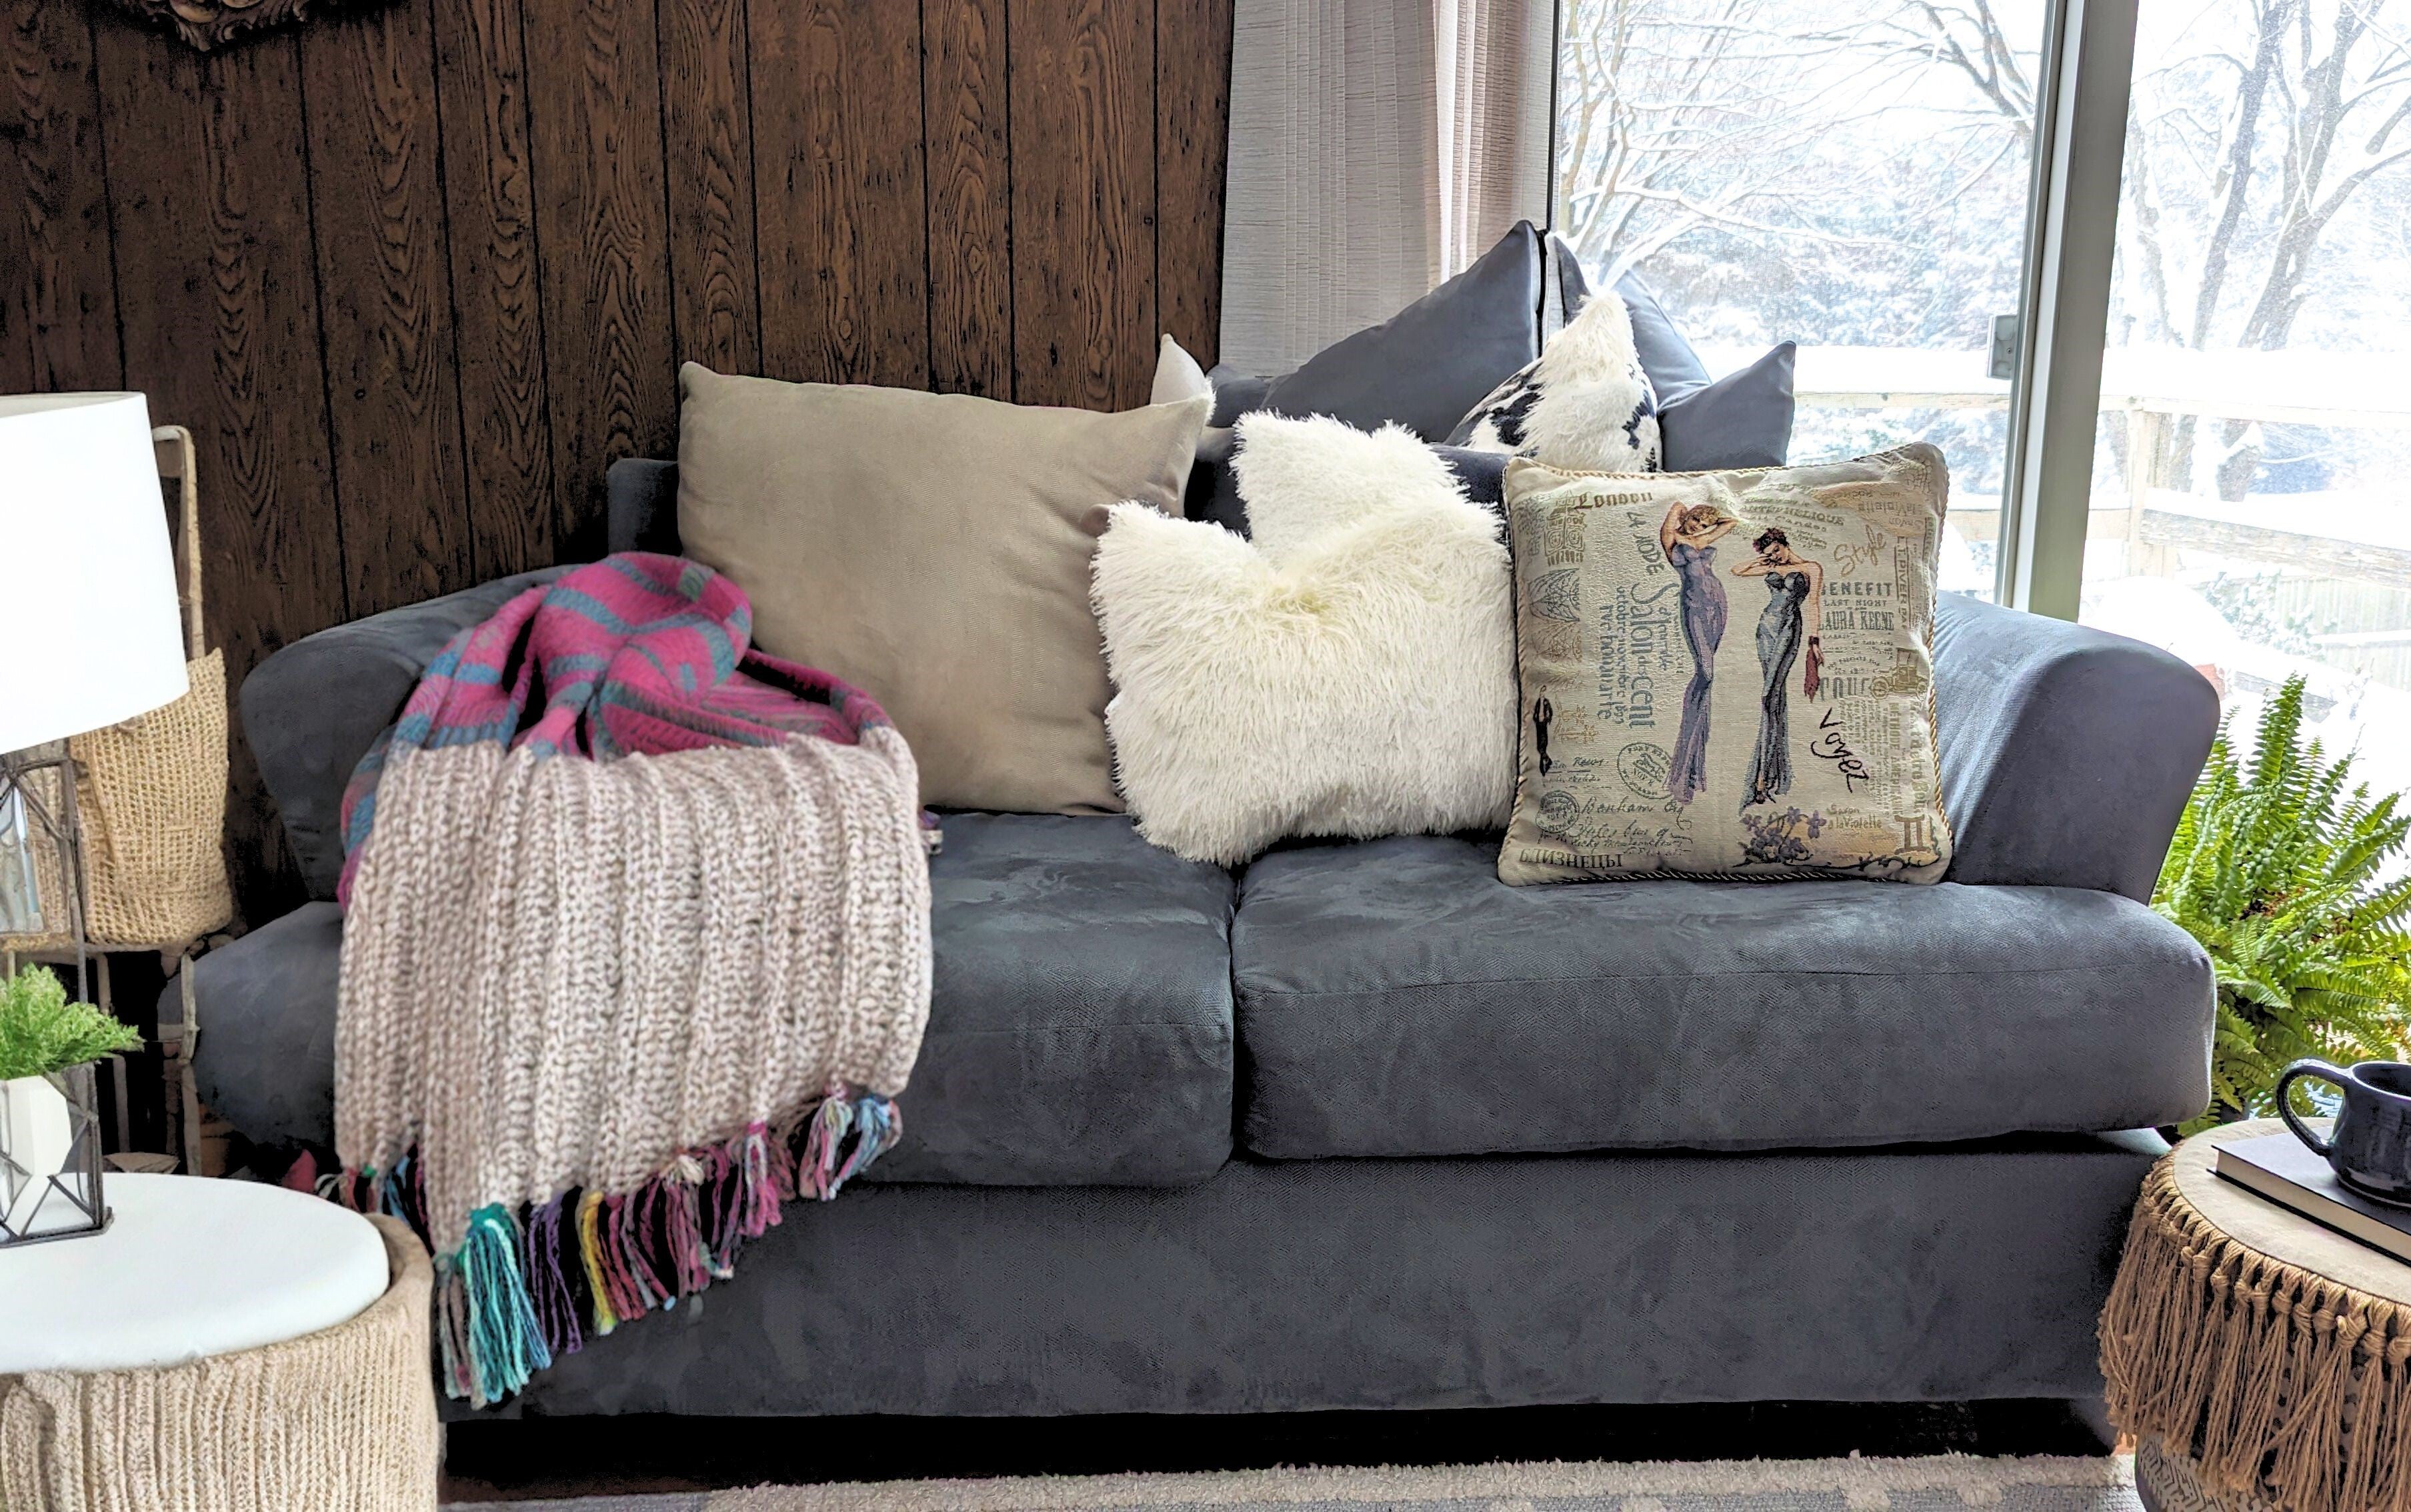 A living room scene with a comfortable couch adorned with decorative pillows and a knitted throw blanket. The tapestry accent pillow has a pattern of 2 girls on it